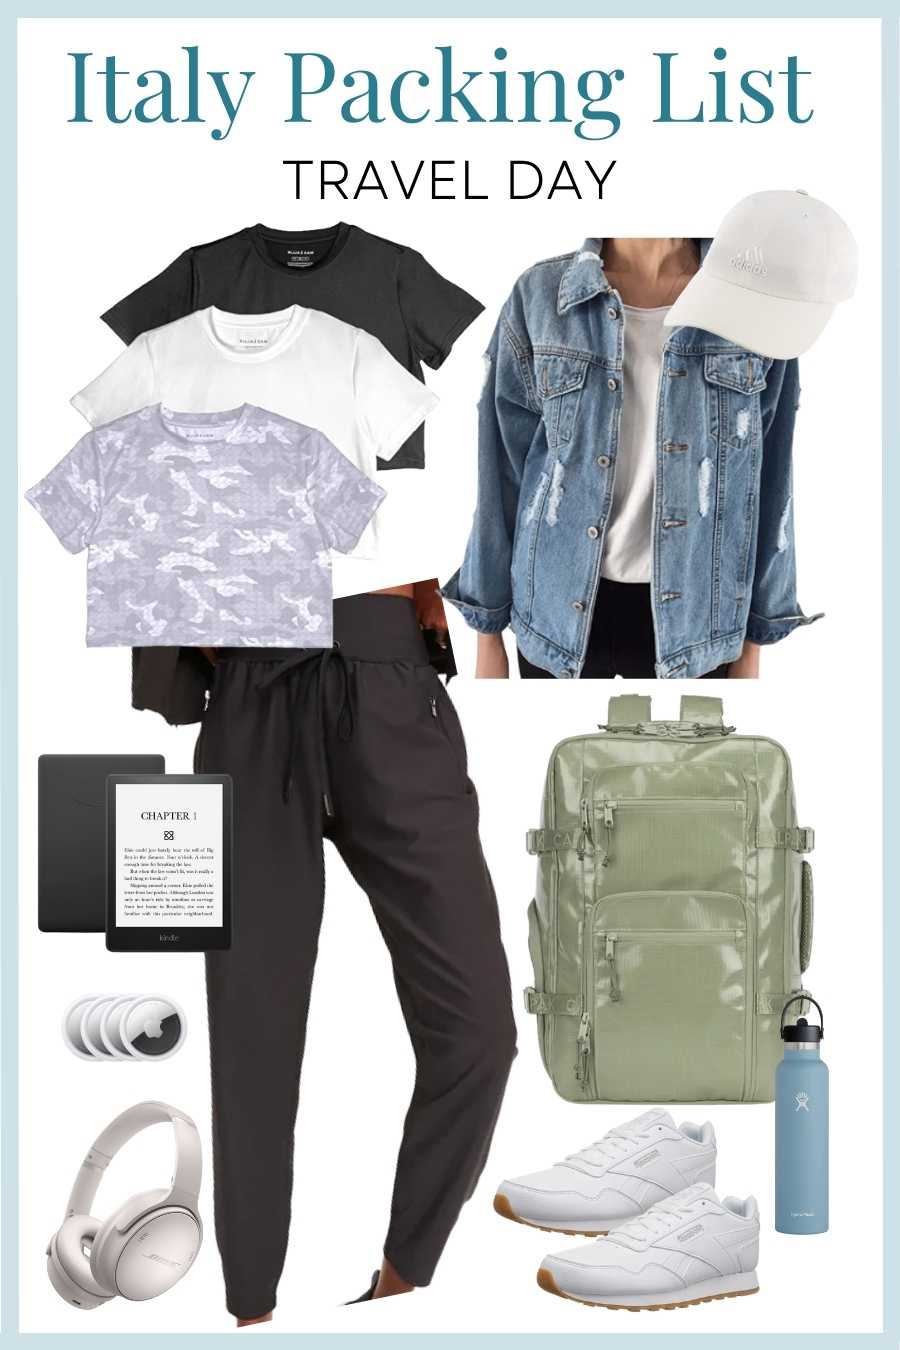 Italy packing list travel day outfit